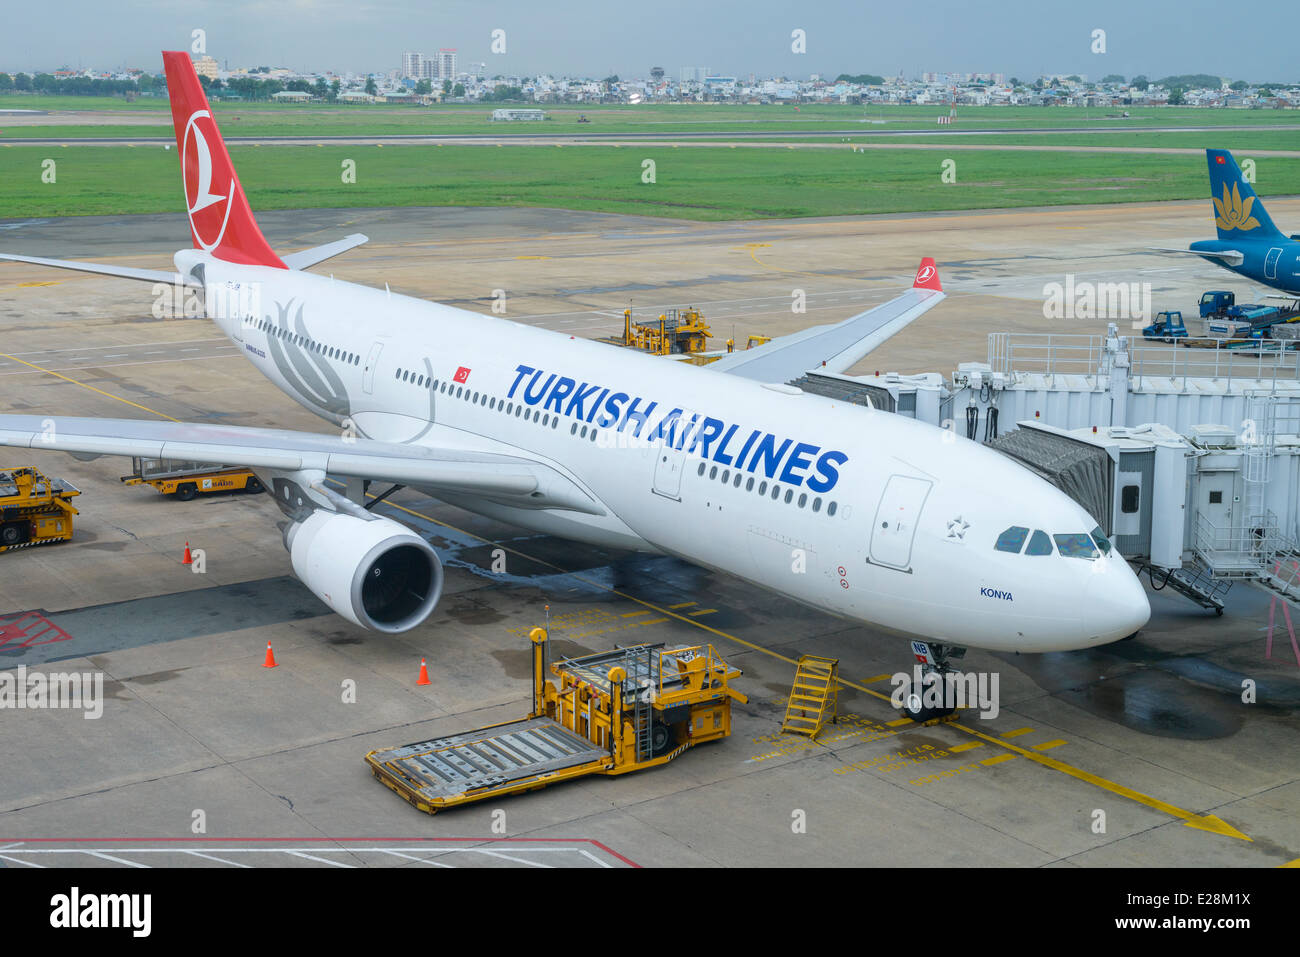 Turkish Airlines Airbus A330 airliner at an airport terminal Stock Photo